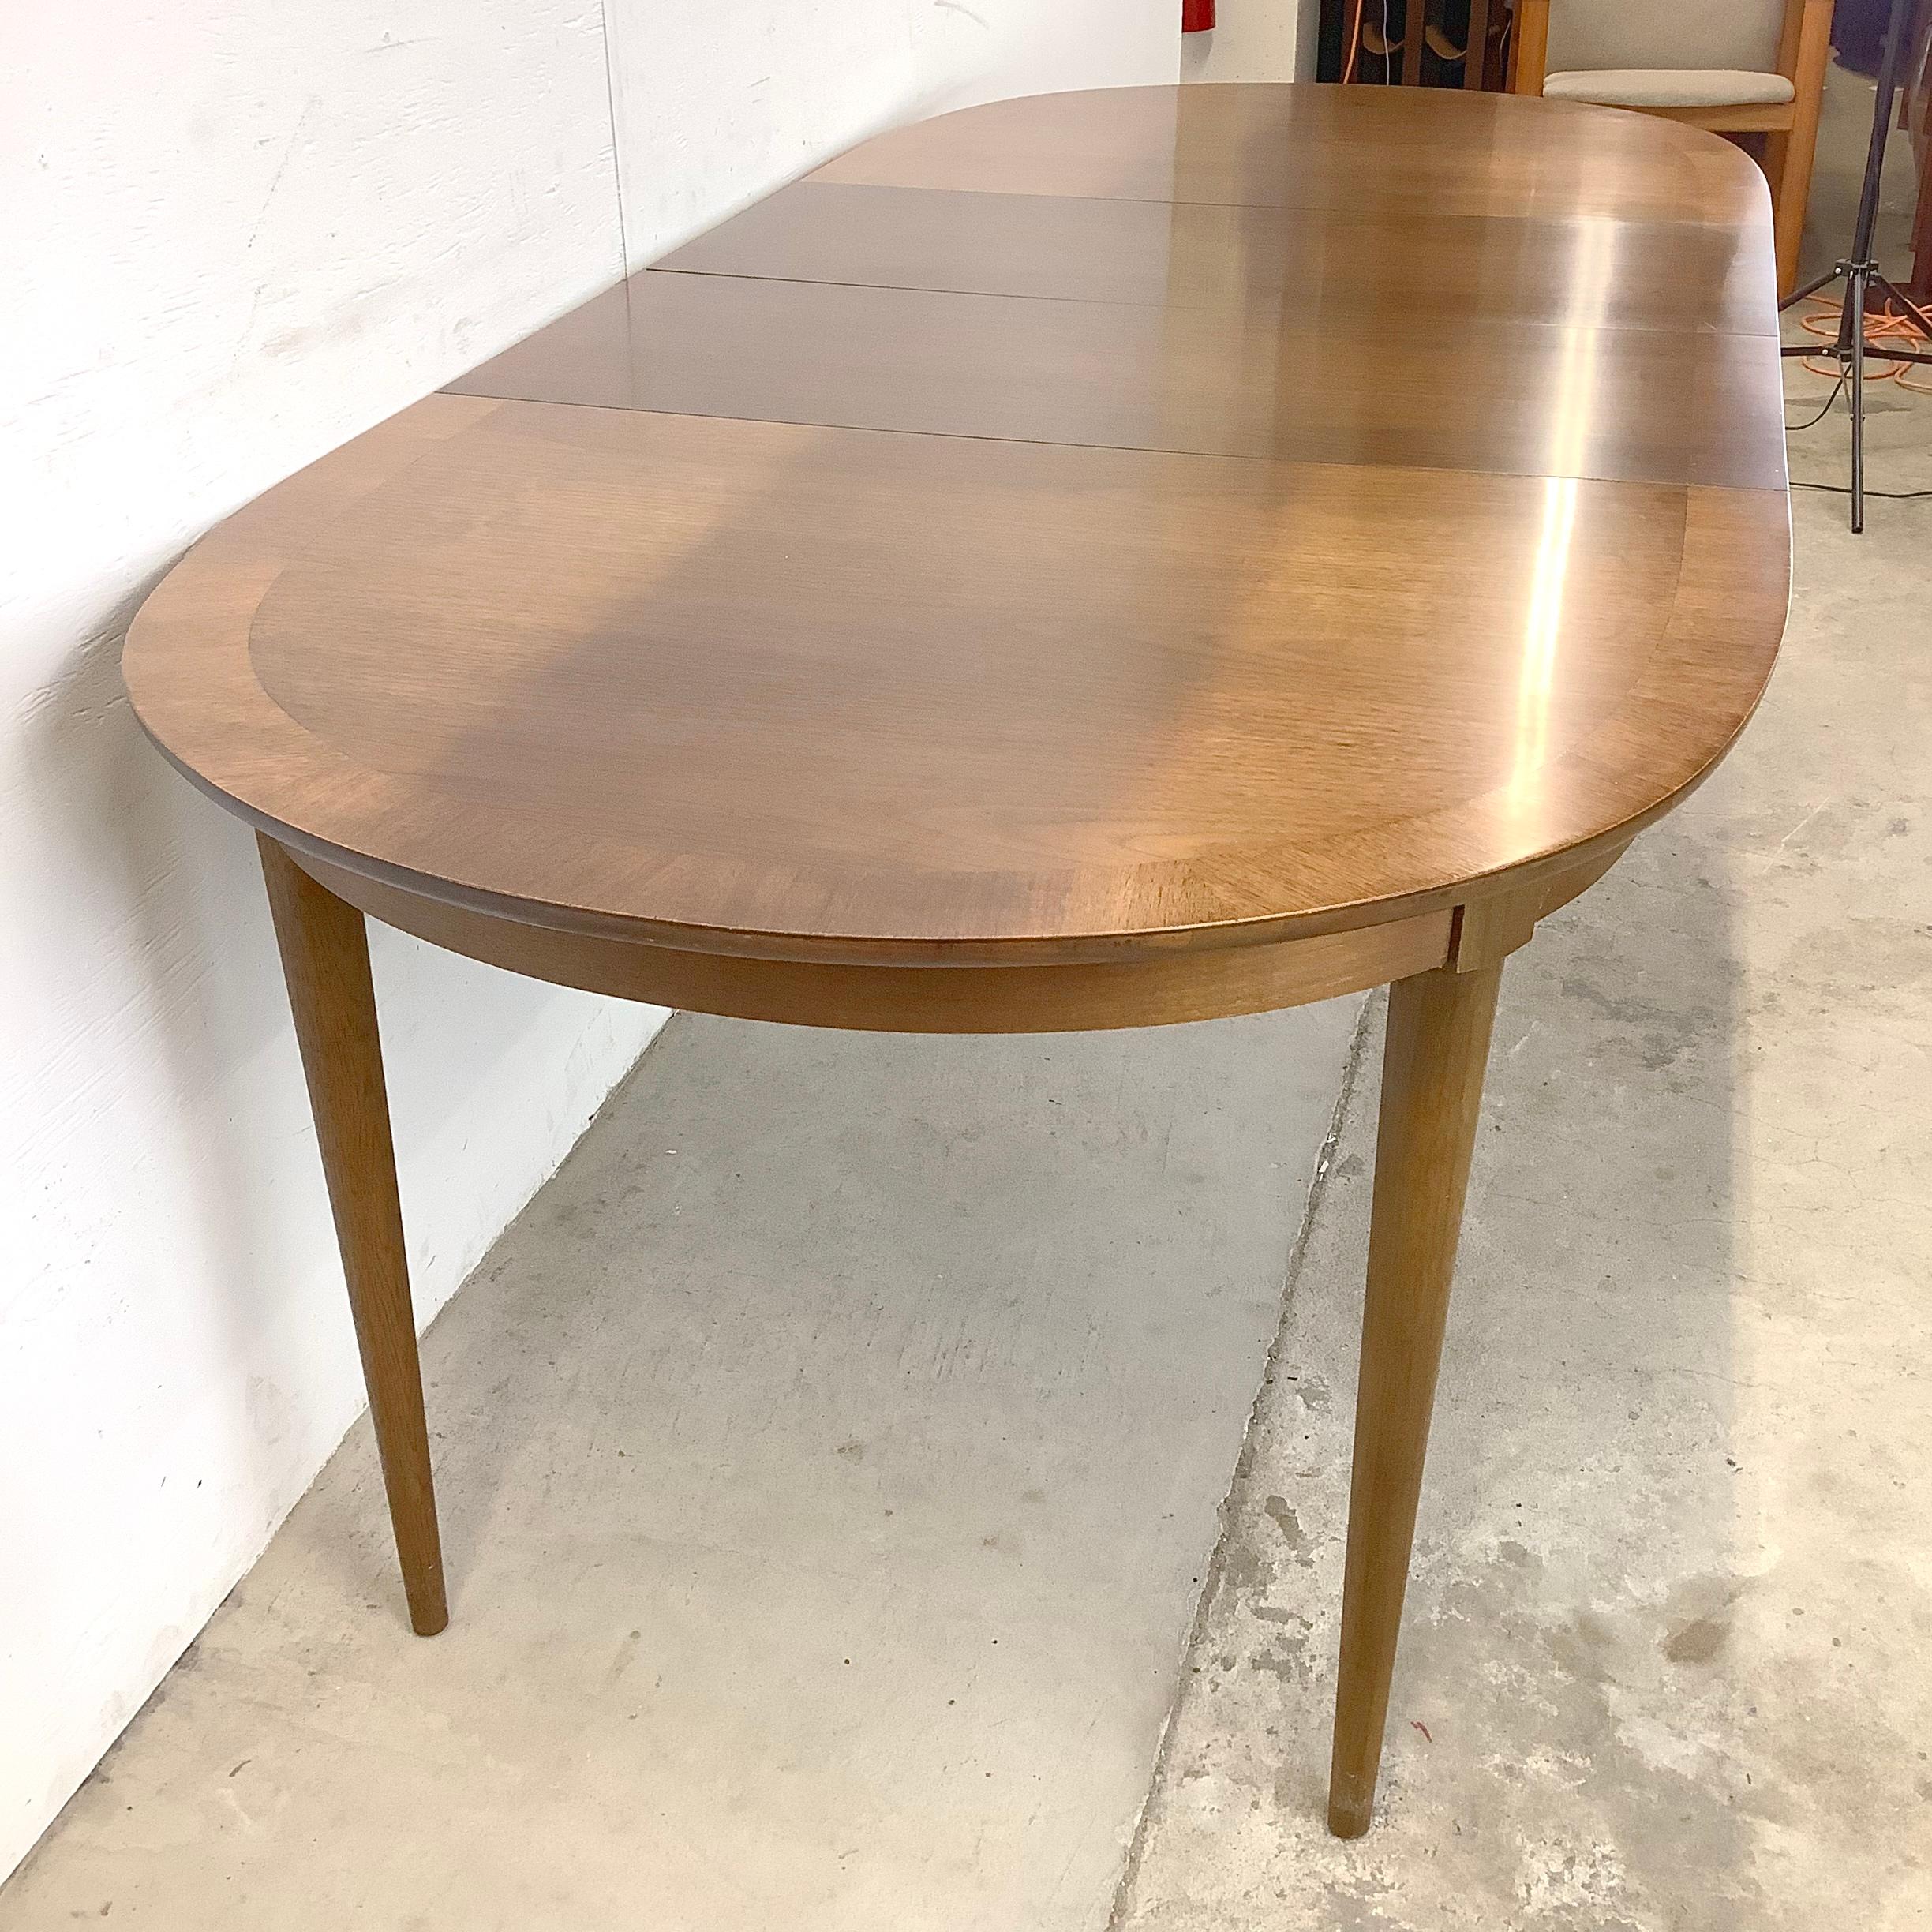 20th Century Vintage Modern R-Way Dining Table With Leaves